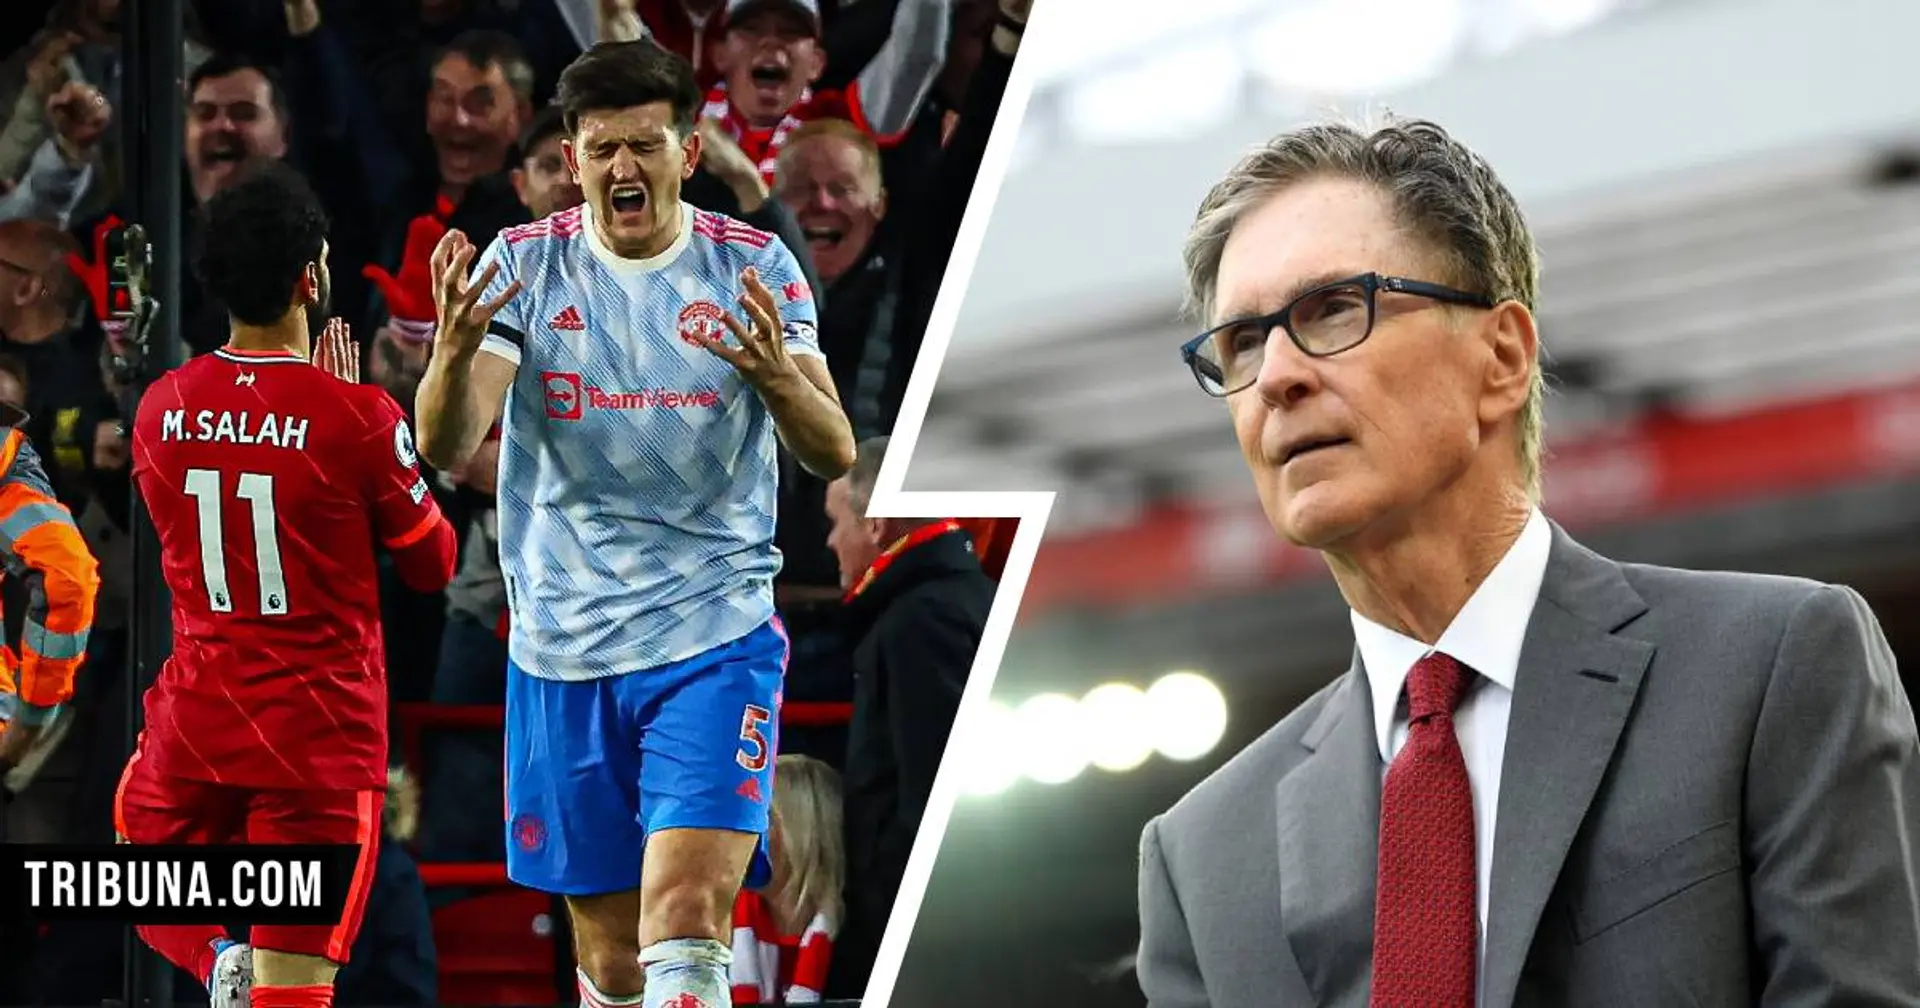 Liverpool leapfrog Bayern, close gap on Man United in Forbes' most valuable club rankings for 2022